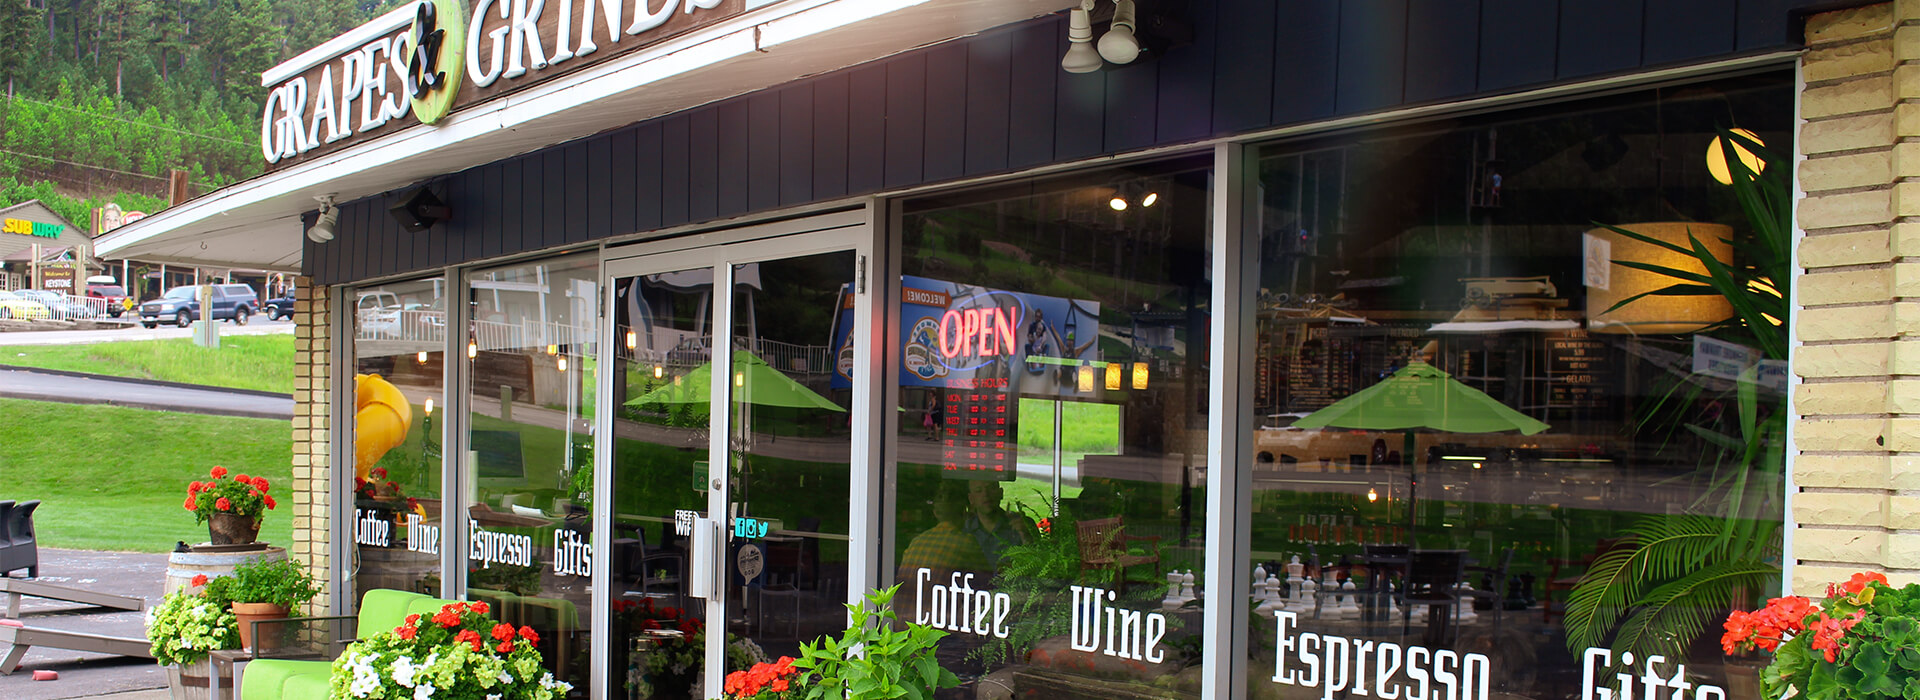 Exterior photo of the Grapes and Grinds Coffee Shop and Wine Bar in Keystone, SD.